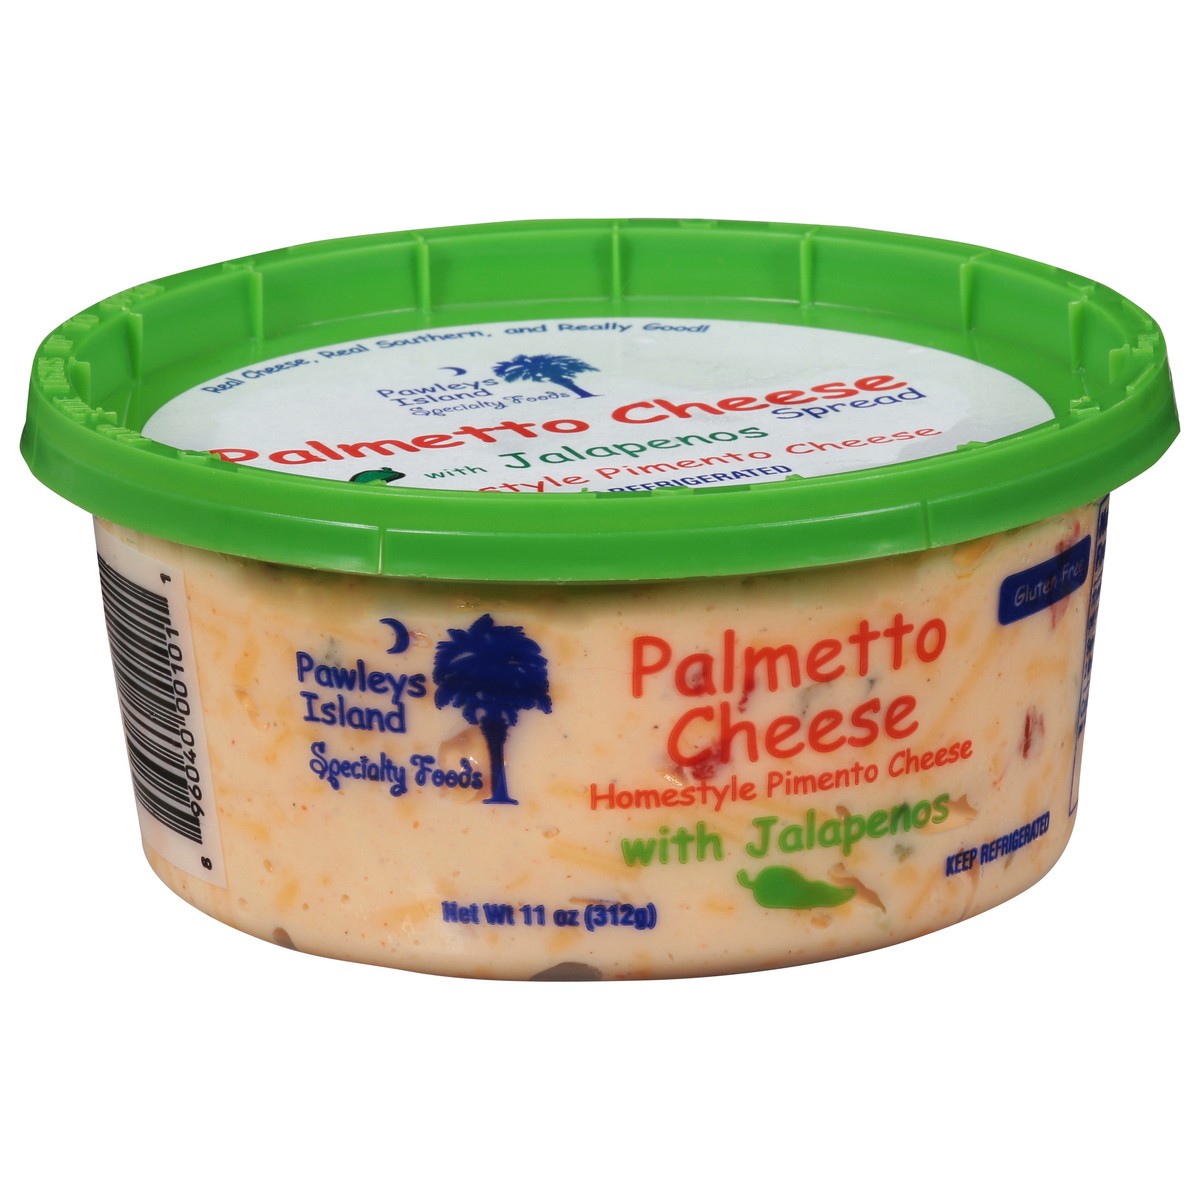 slide 8 of 9, Pawleys Island Specialty Foods Homestyle Pimento Palmetto Cheese Spread with Jalapenos 11 oz, 11 oz